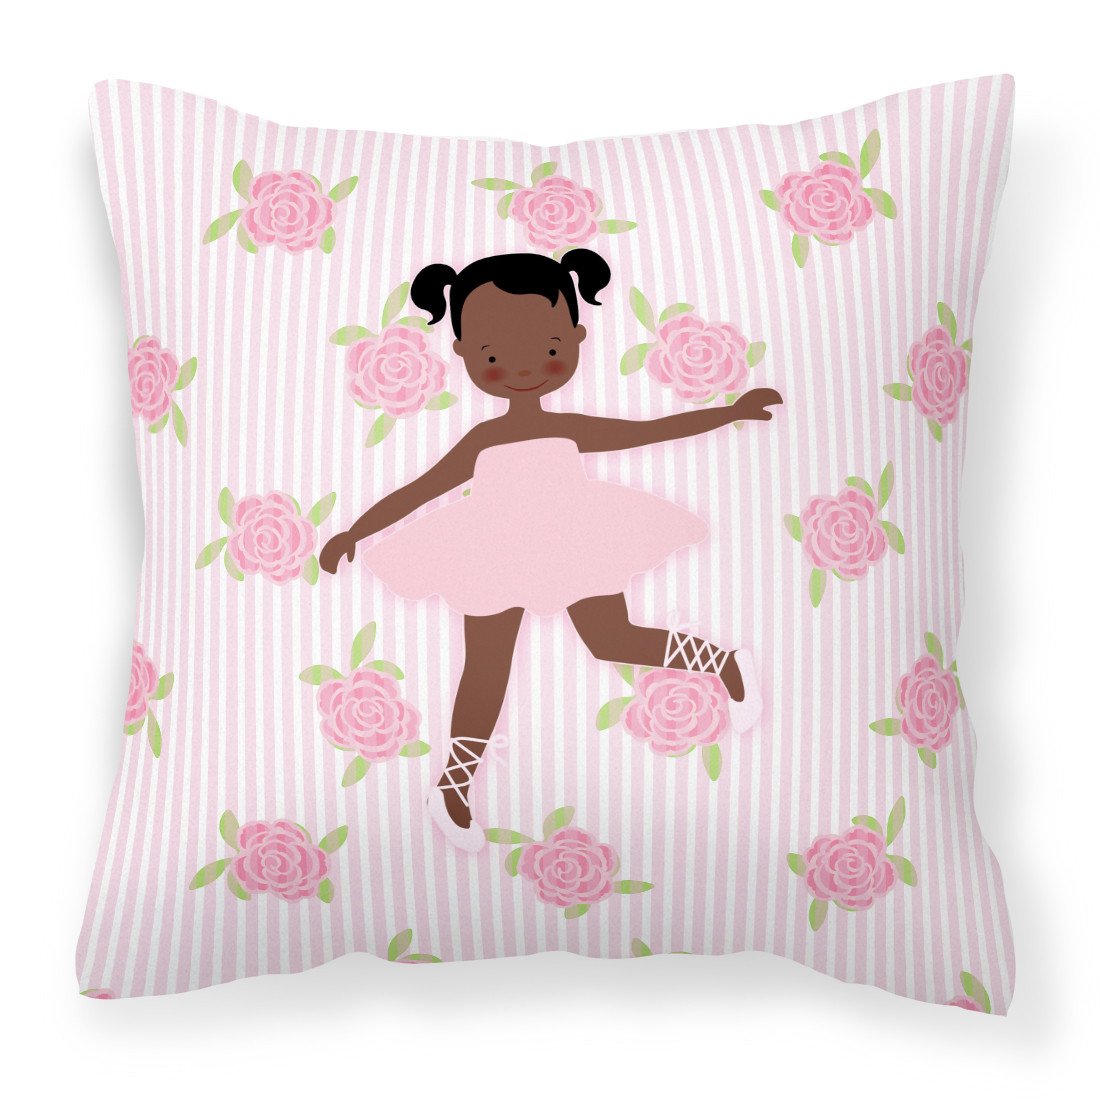 Ballerina African American Ponytails Fabric Decorative Pillow BB5192PW1818 by Caroline's Treasures